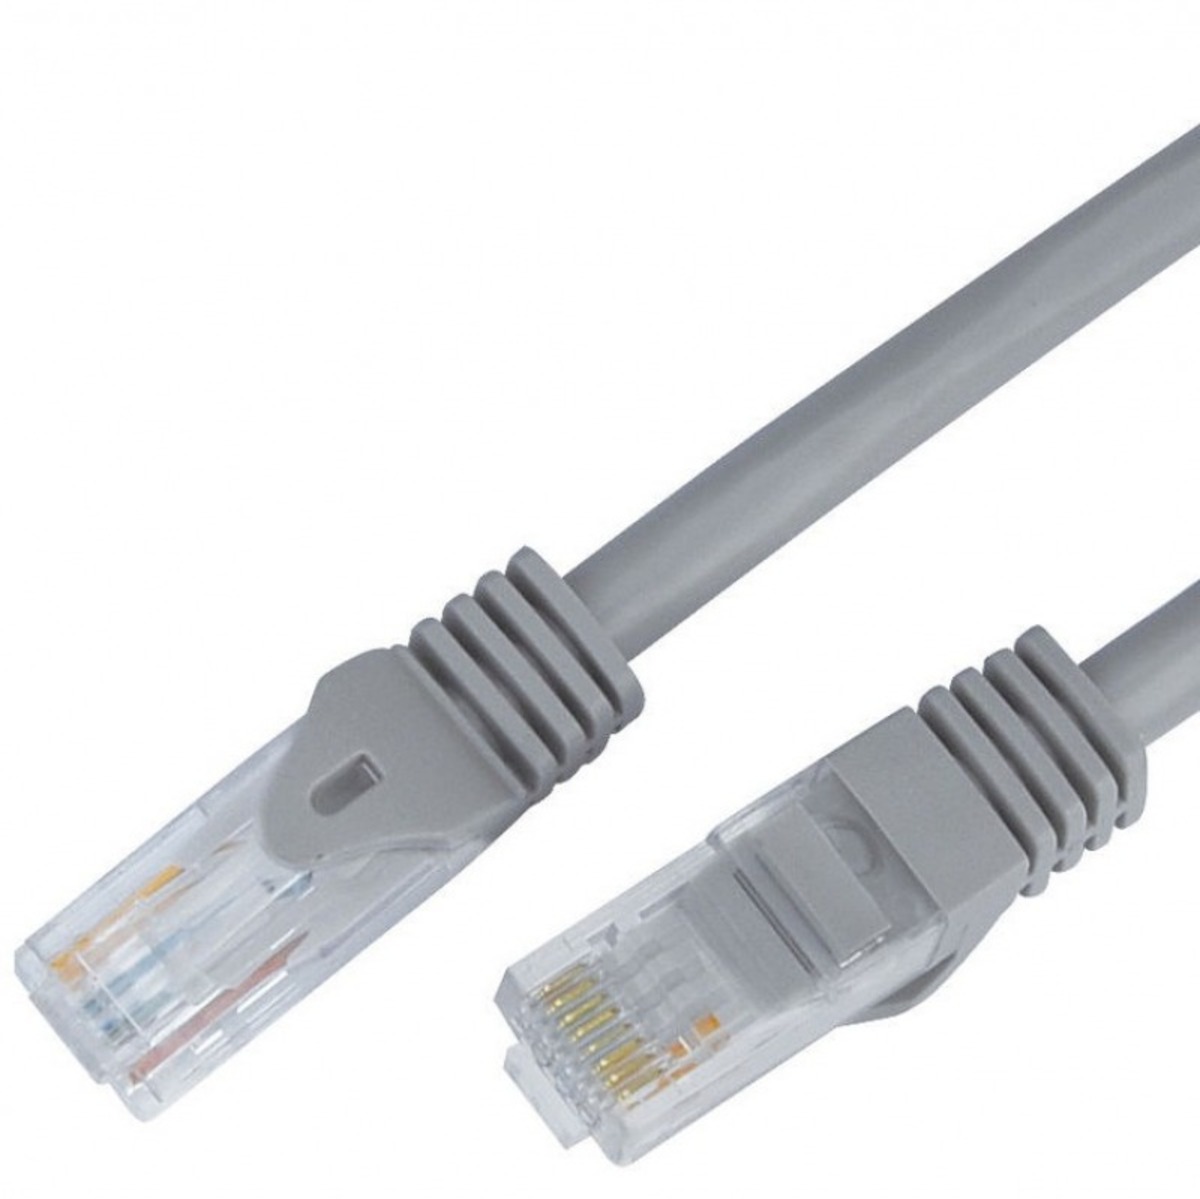 Iends Cat 6 Patch Cord Network Cable Ethernet Patch Cord Cable Grey 5 Meter CA8184